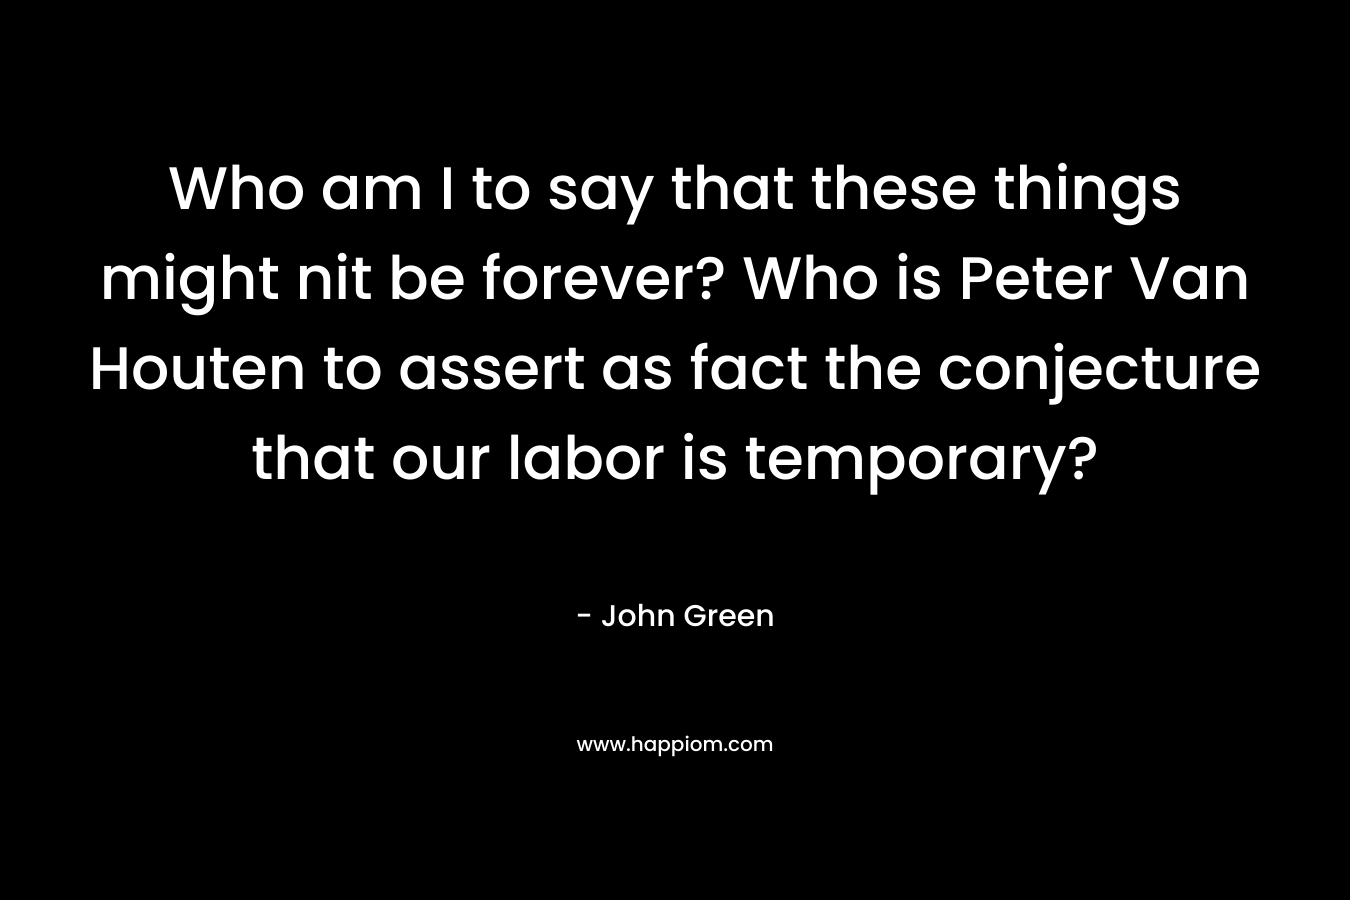 Who am I to say that these things might nit be forever? Who is Peter Van Houten to assert as fact the conjecture that our labor is temporary?